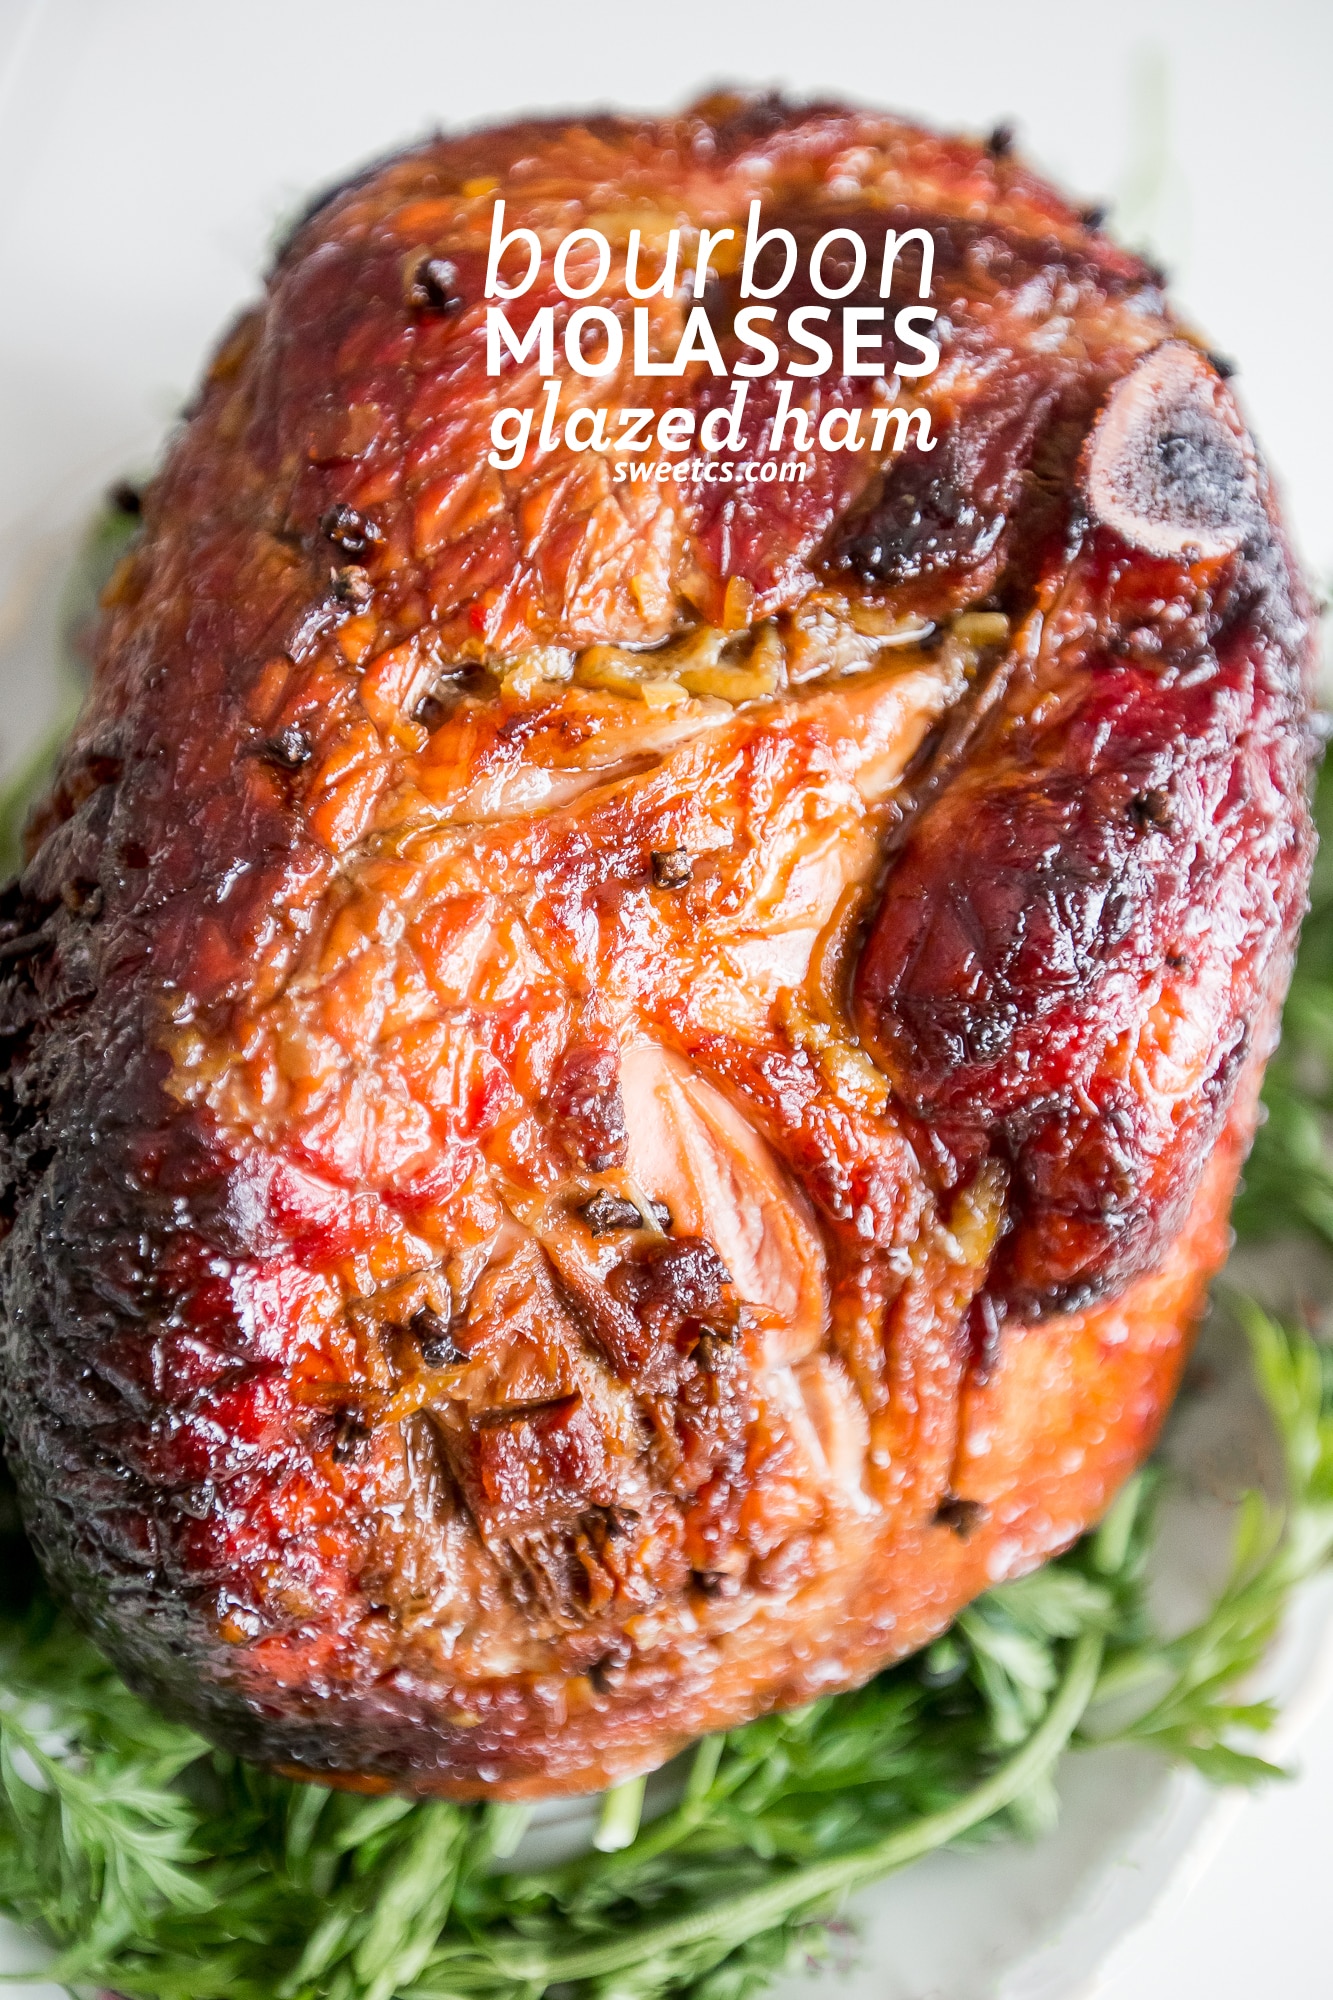 Bourbon molasses glazed ham- this is so delicious and the best way to make baked ham!